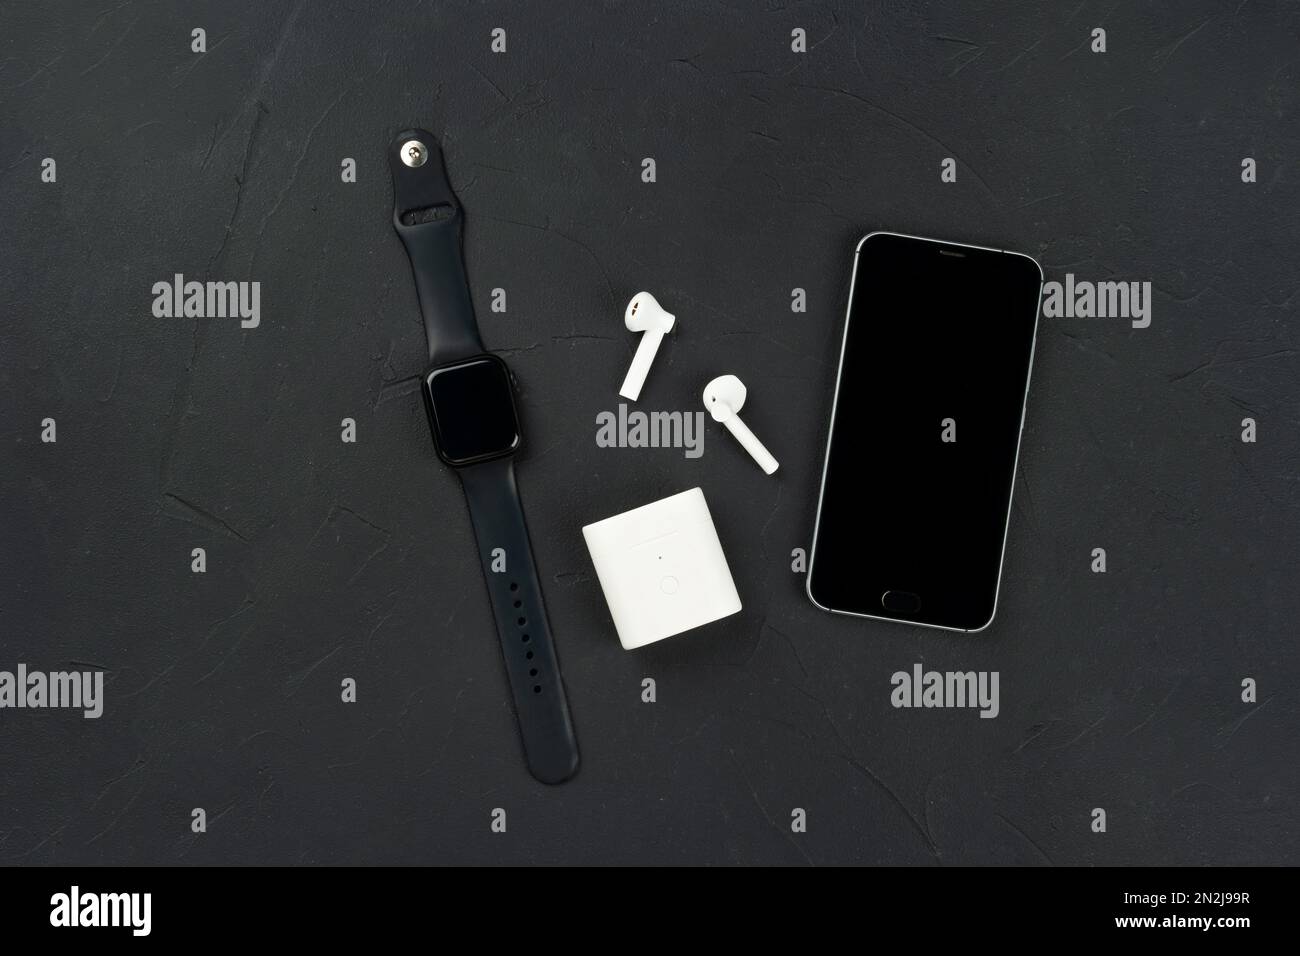 Fashion gadgets, mobile phone, smart watch and wireless headphones on a dark concrete background, top view. Stock Photo